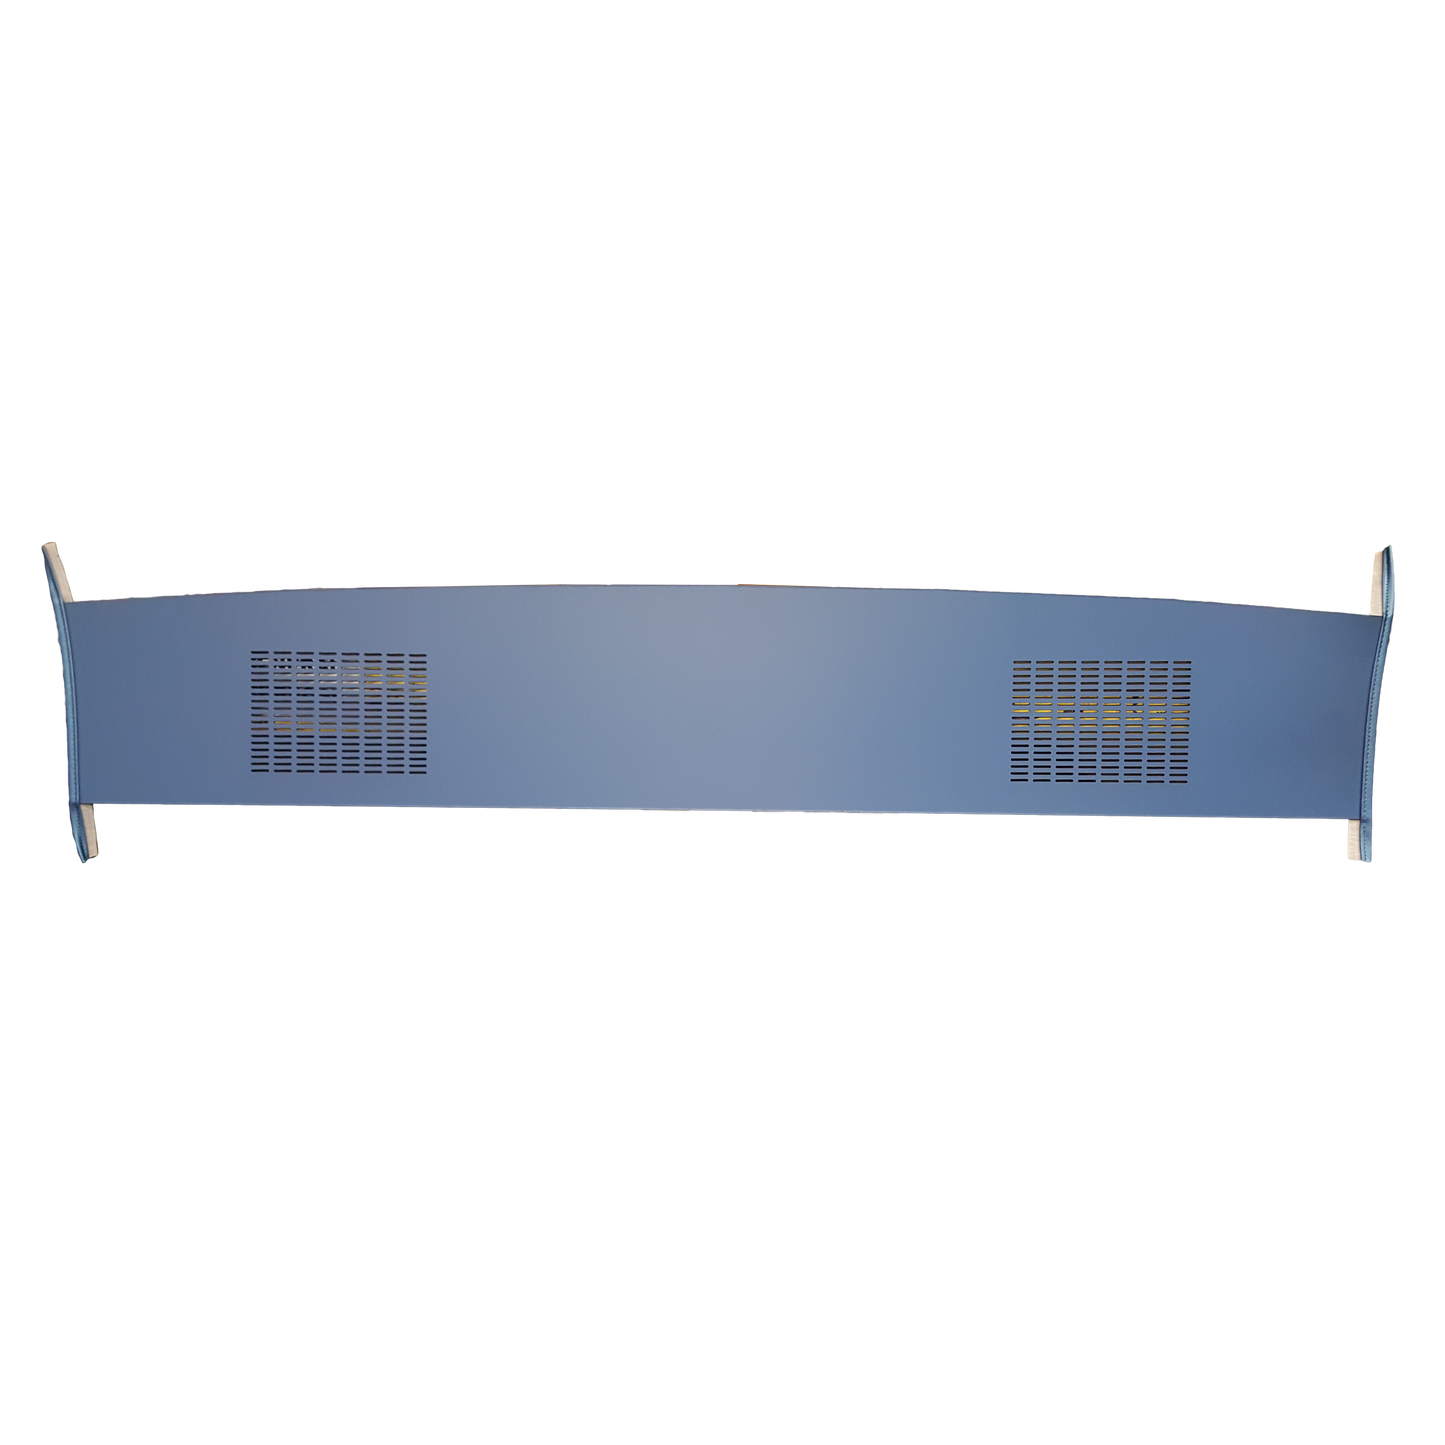 74 B-BODY PACKAGE TRAY WITH